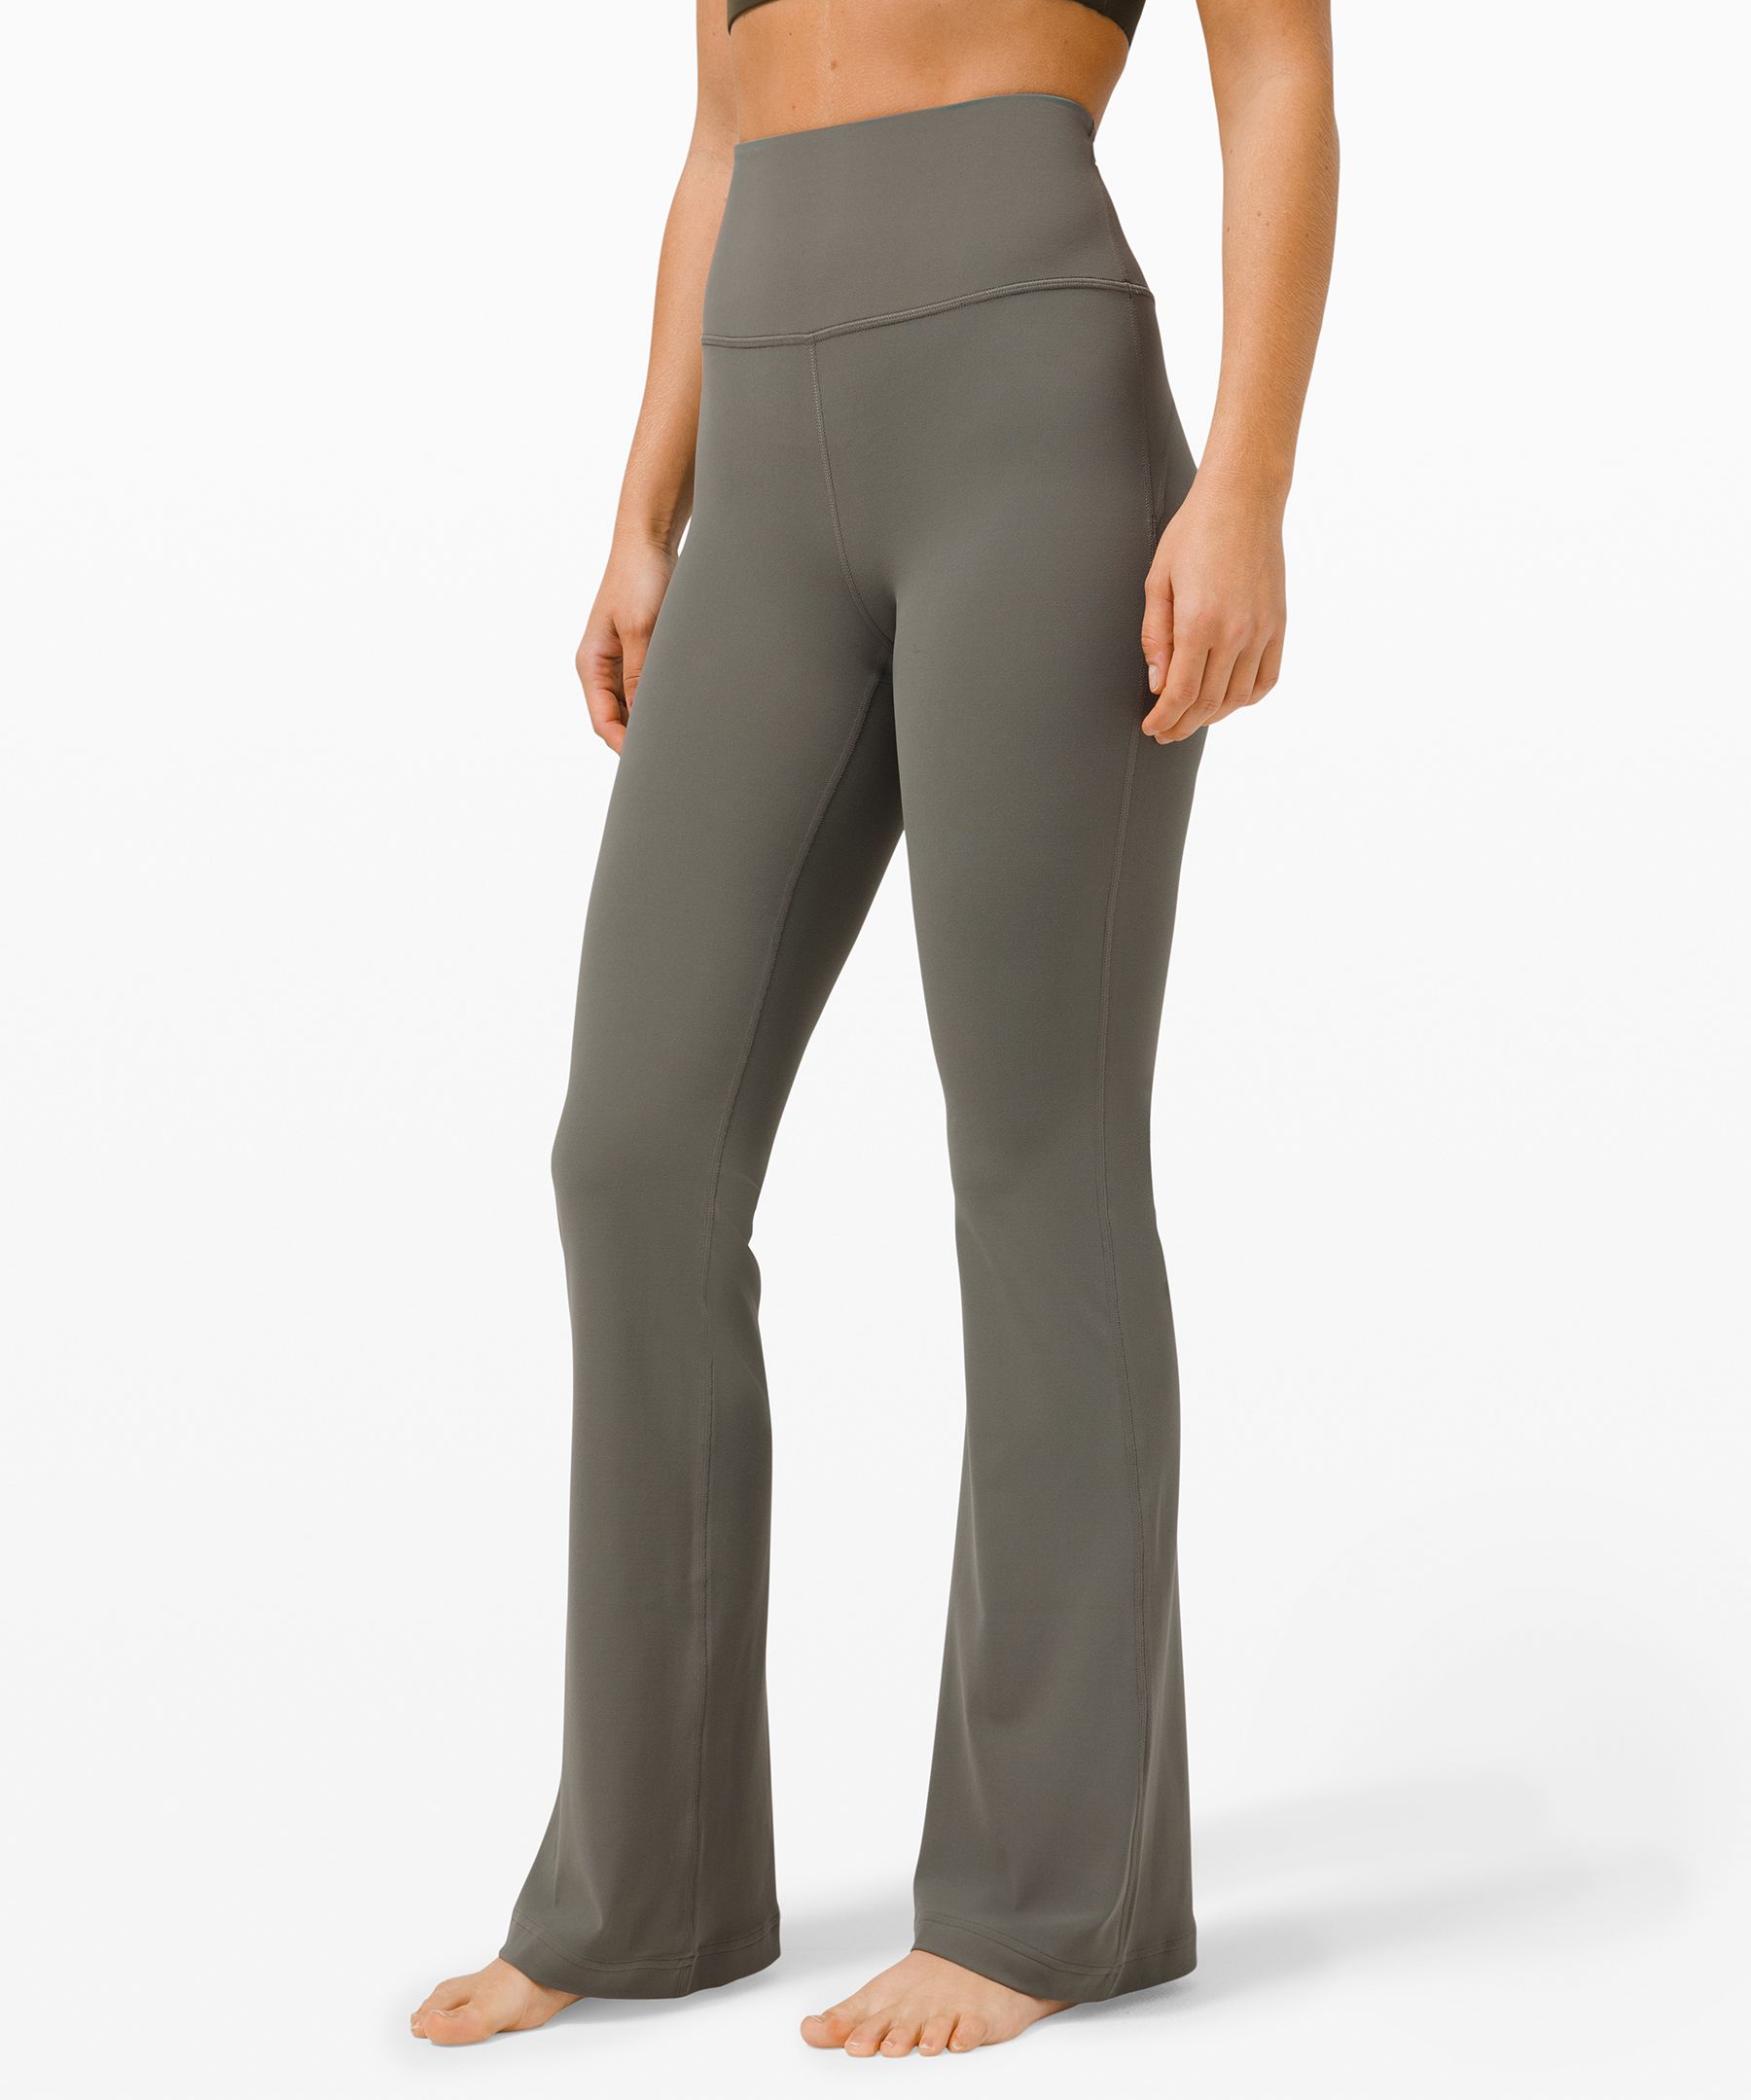 Lululemon super high nulu flared groove pant review-5 - Agent